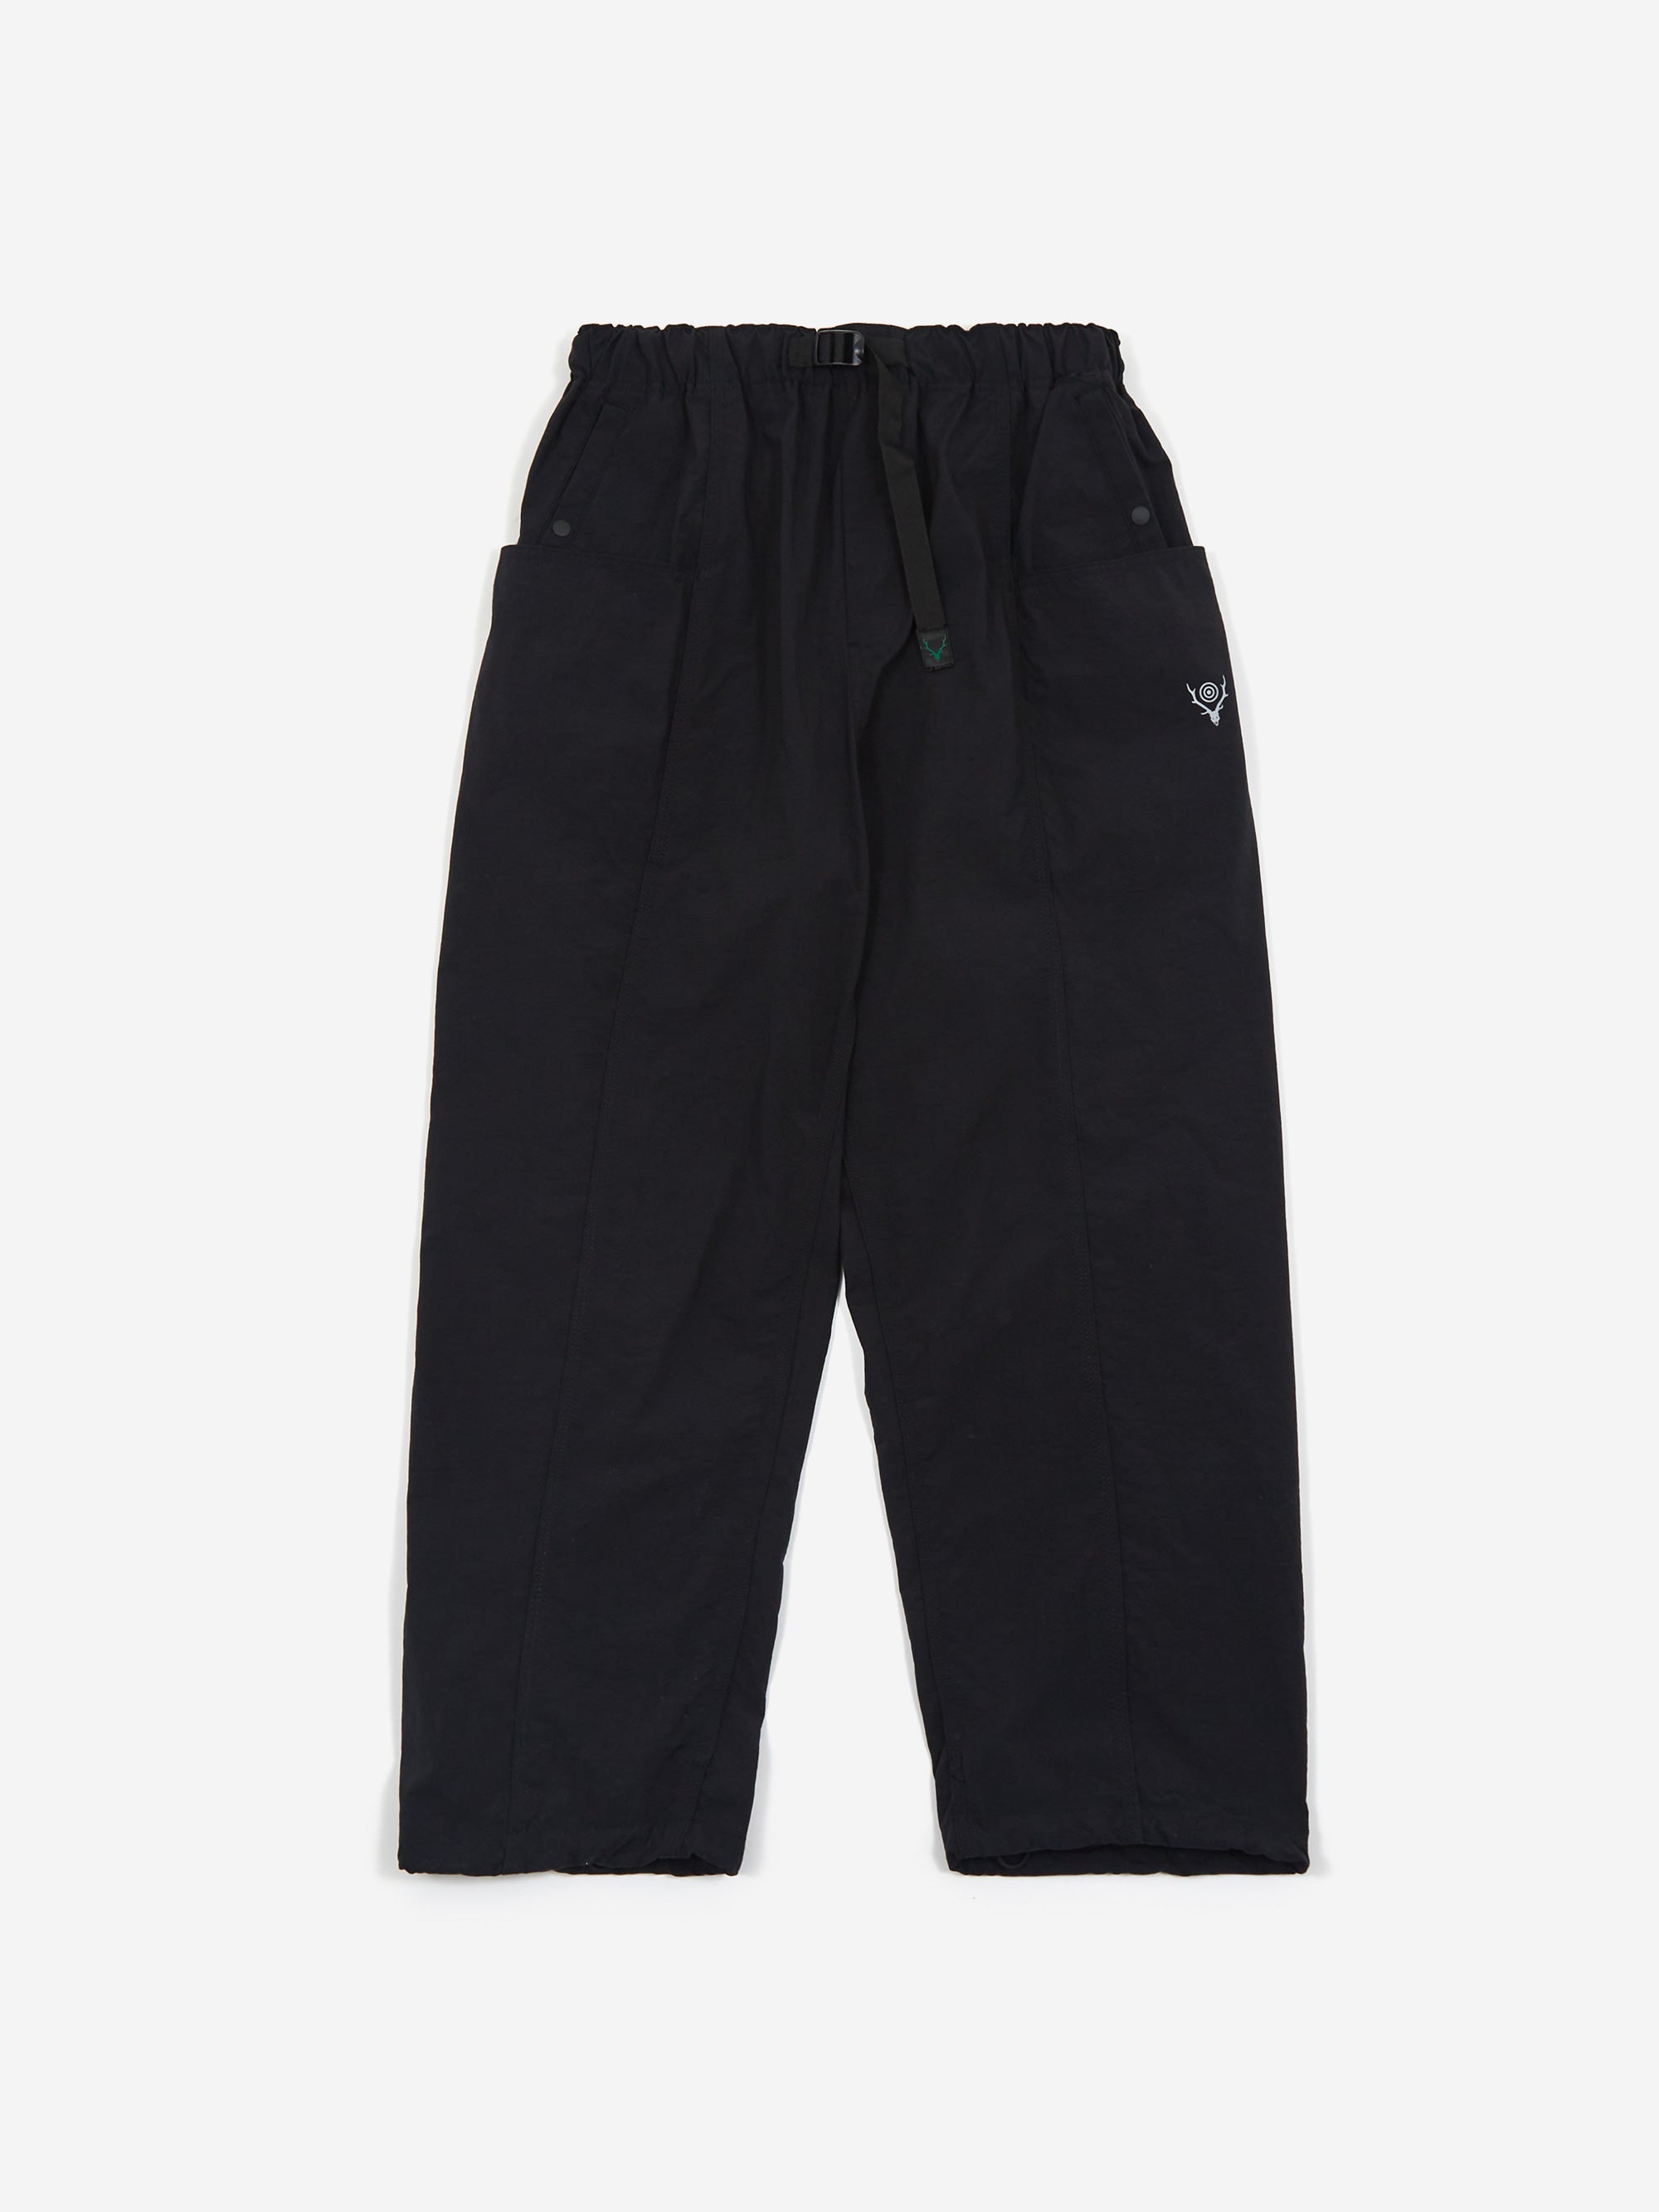 South2 West8 Belted C.S. Pant - Nylon Oxford - Black – Goodhood